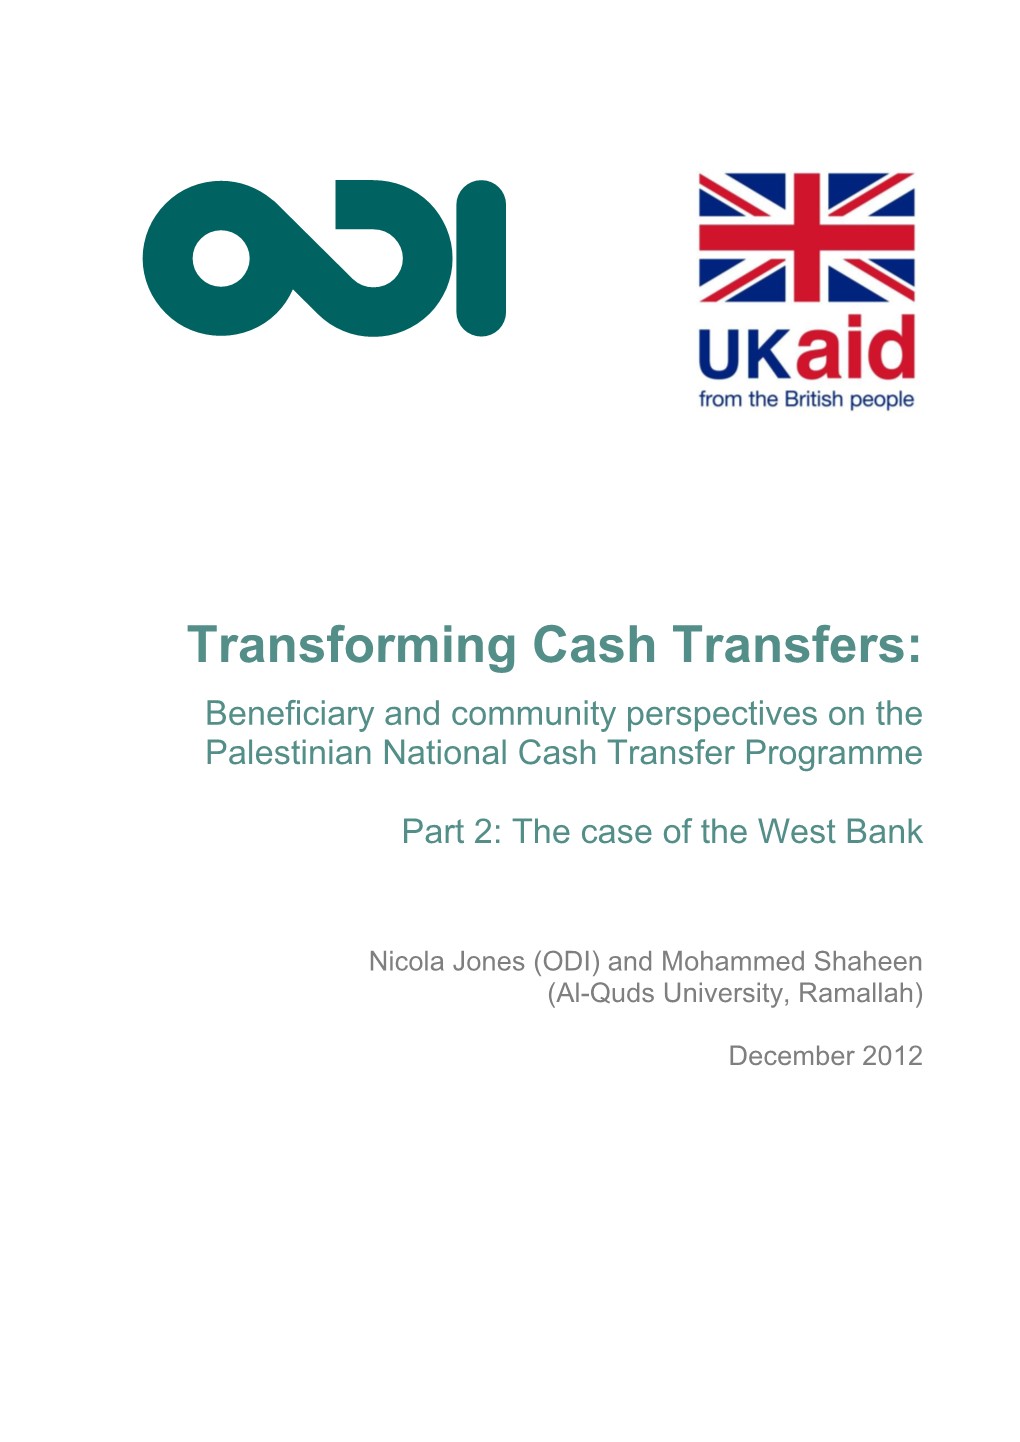 Beneficiary and Community Perspectives on the Palestinian National Cash Transfer Programme